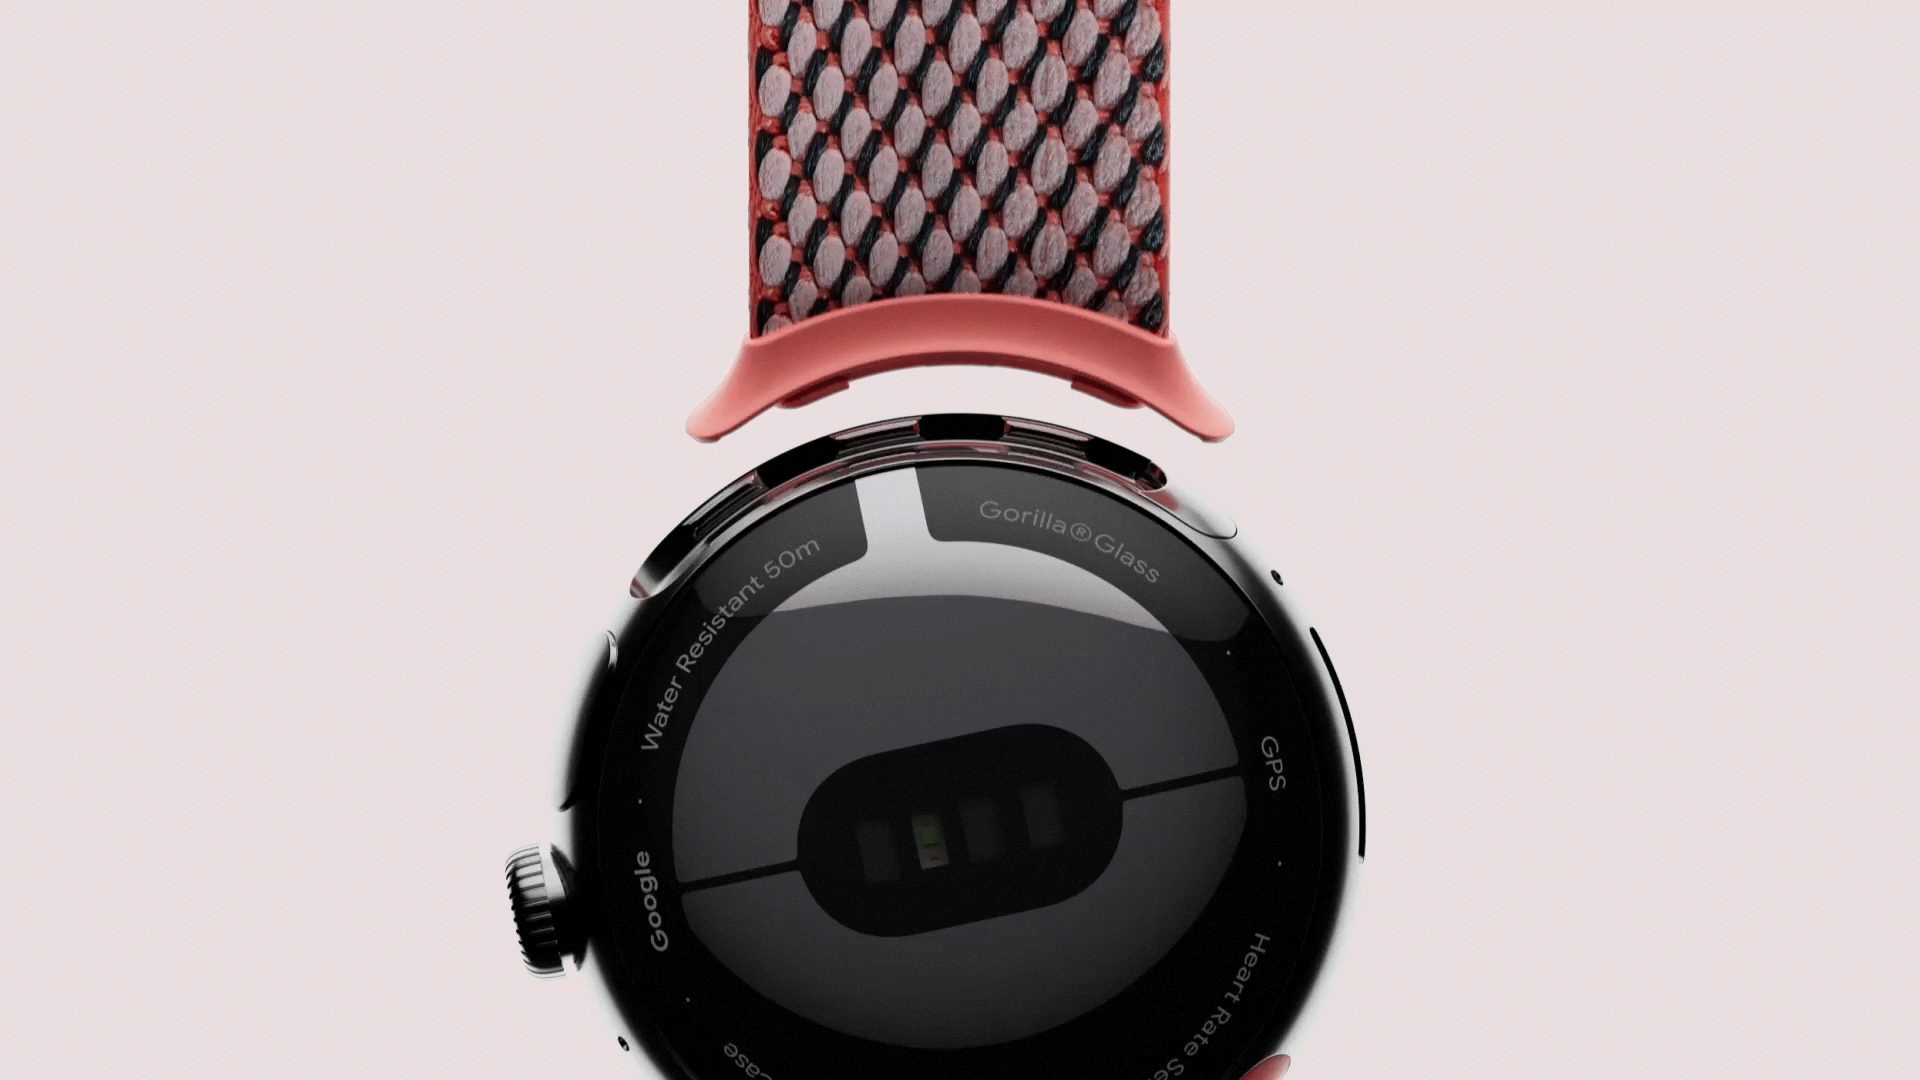 Attaching a band to the Pixel Watch